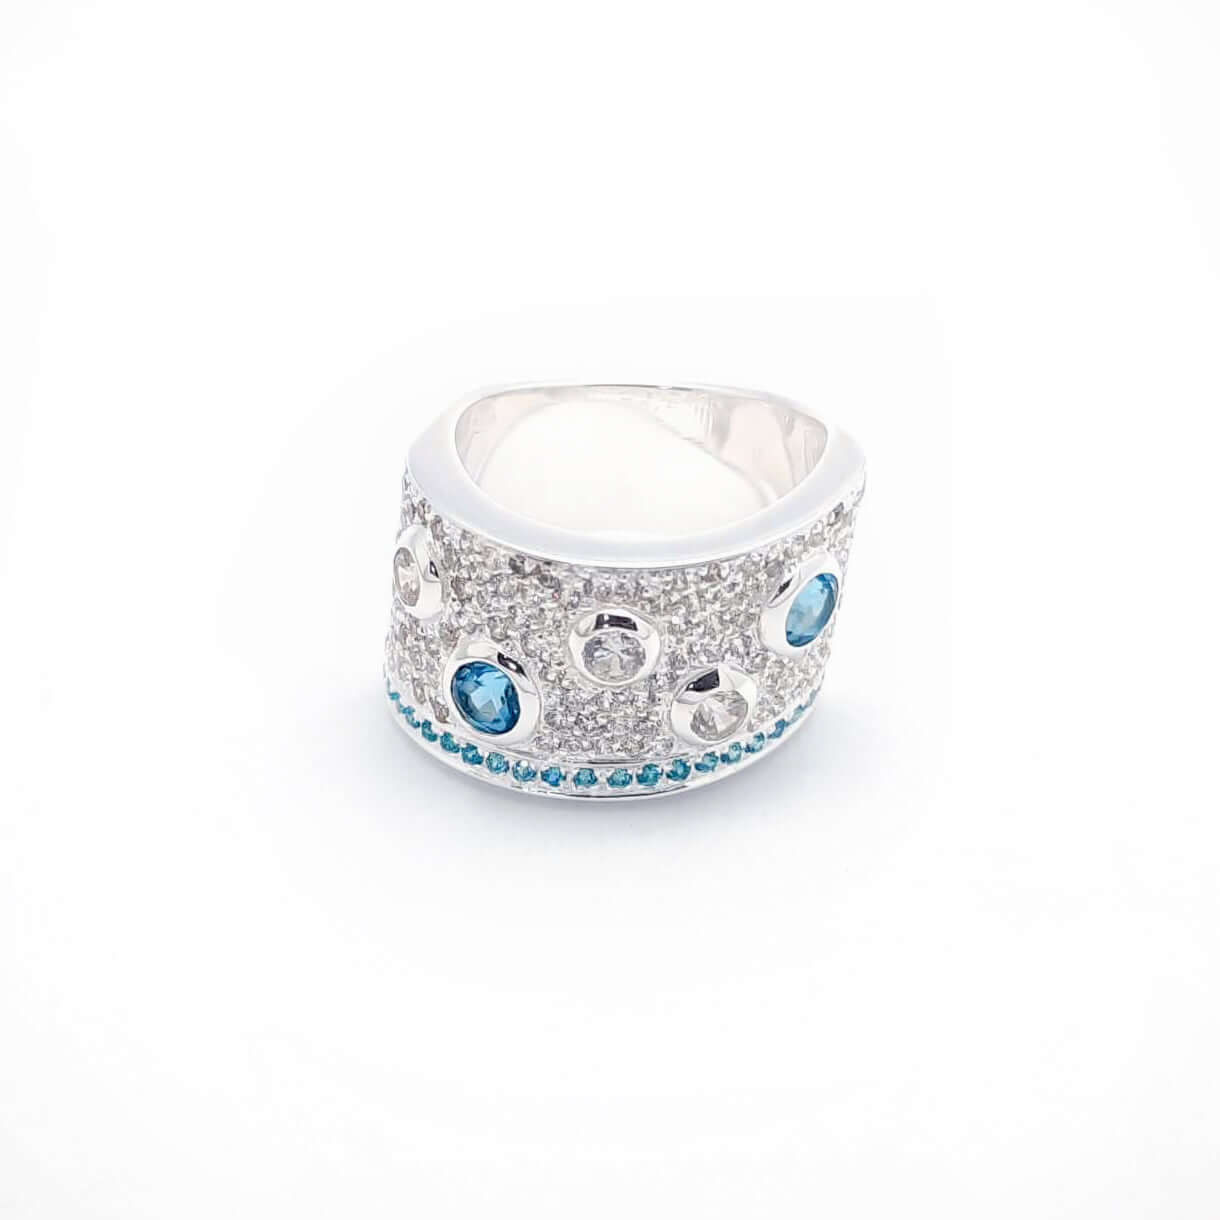 Le-Morne-Silver-Ring-with-Cubic-Zirconias